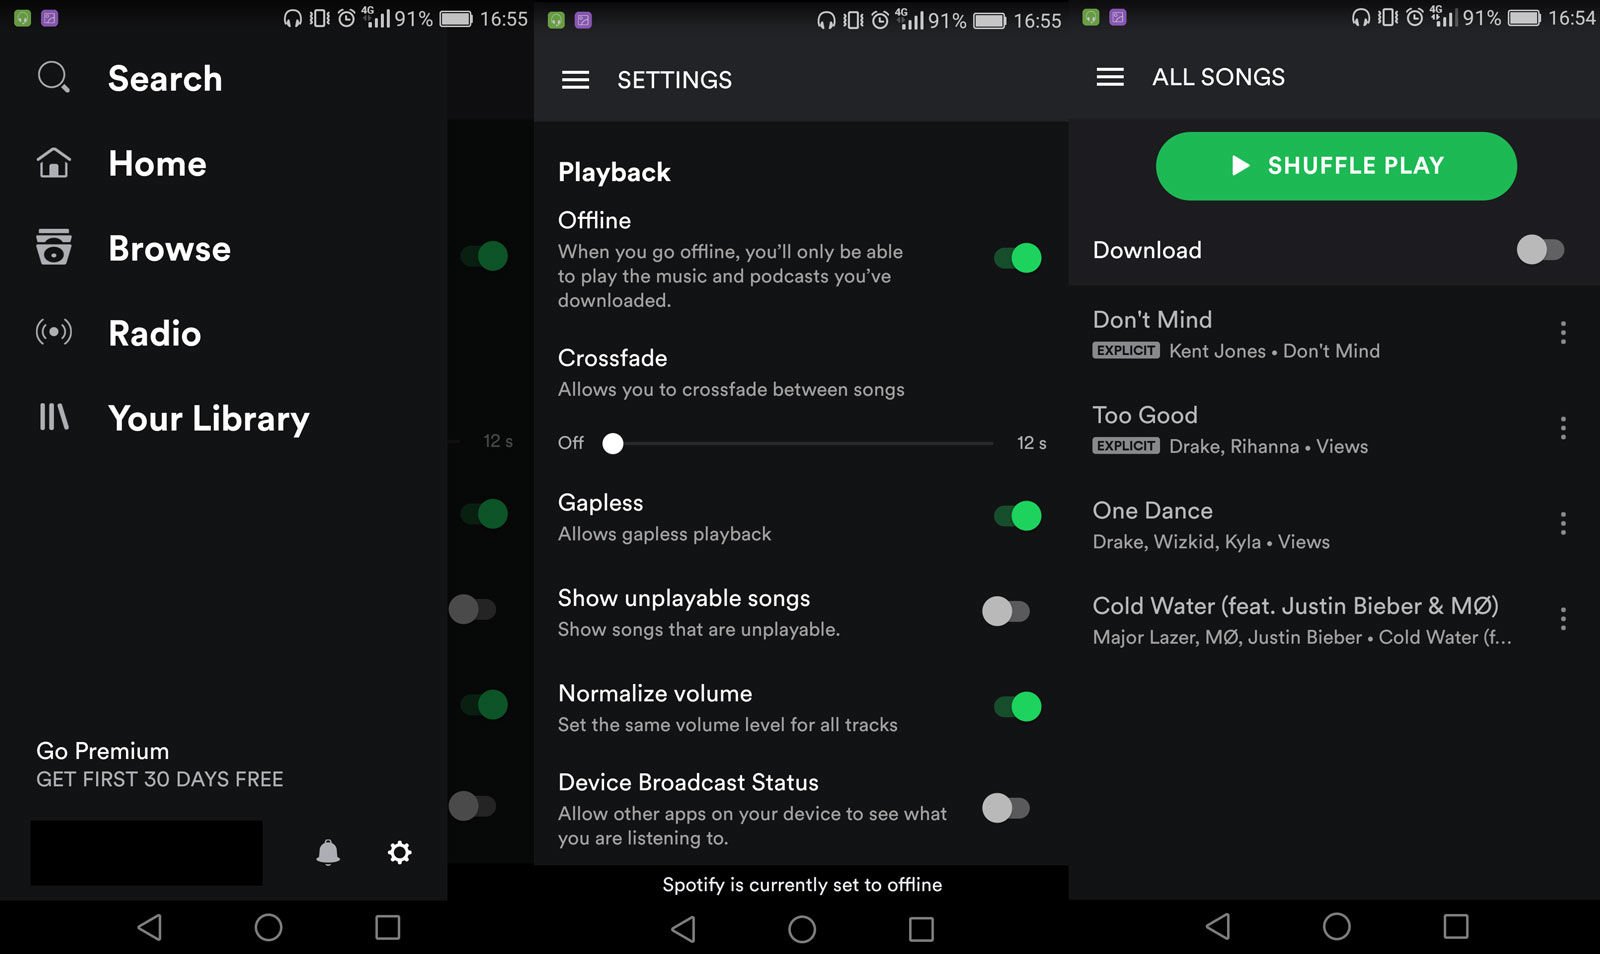 Download A Song From Android To Spotify